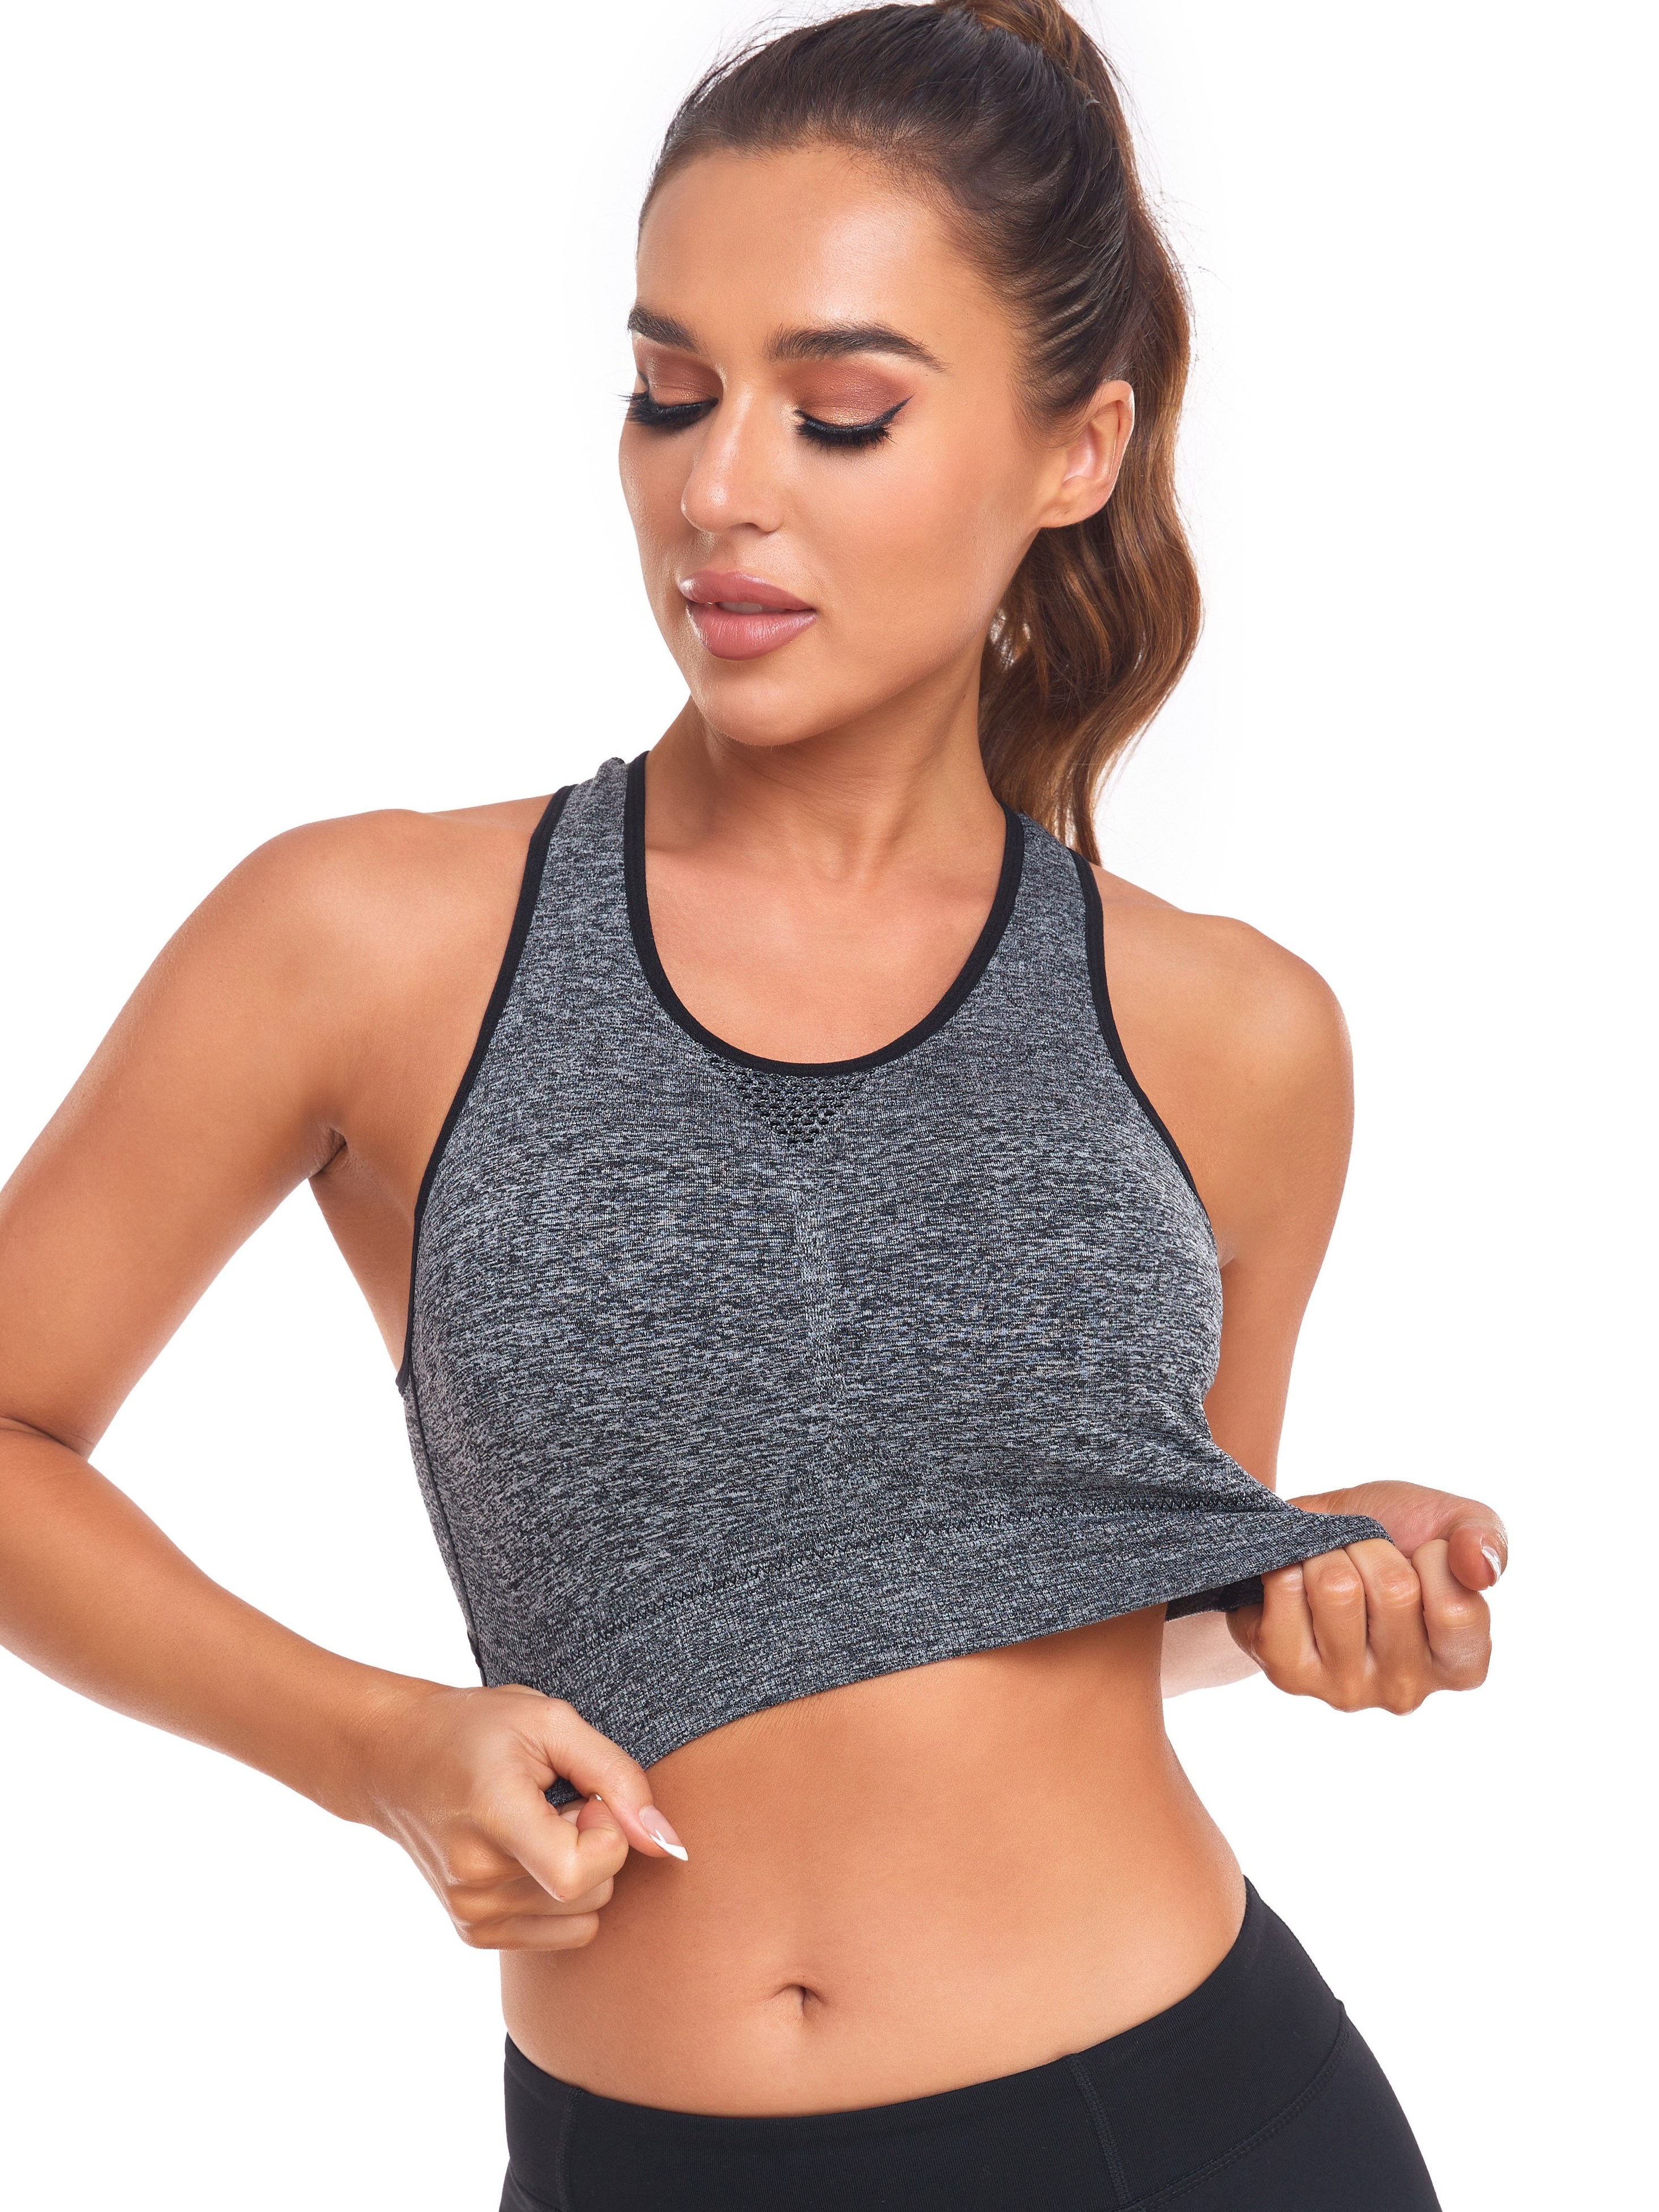 Contrast Binding 2-in-1 Criss Cross Back Sports Bra, Mesh Cutout Breathable  High Impact Yoga Fitness Running Cropped Tank Top, Women's Activewear